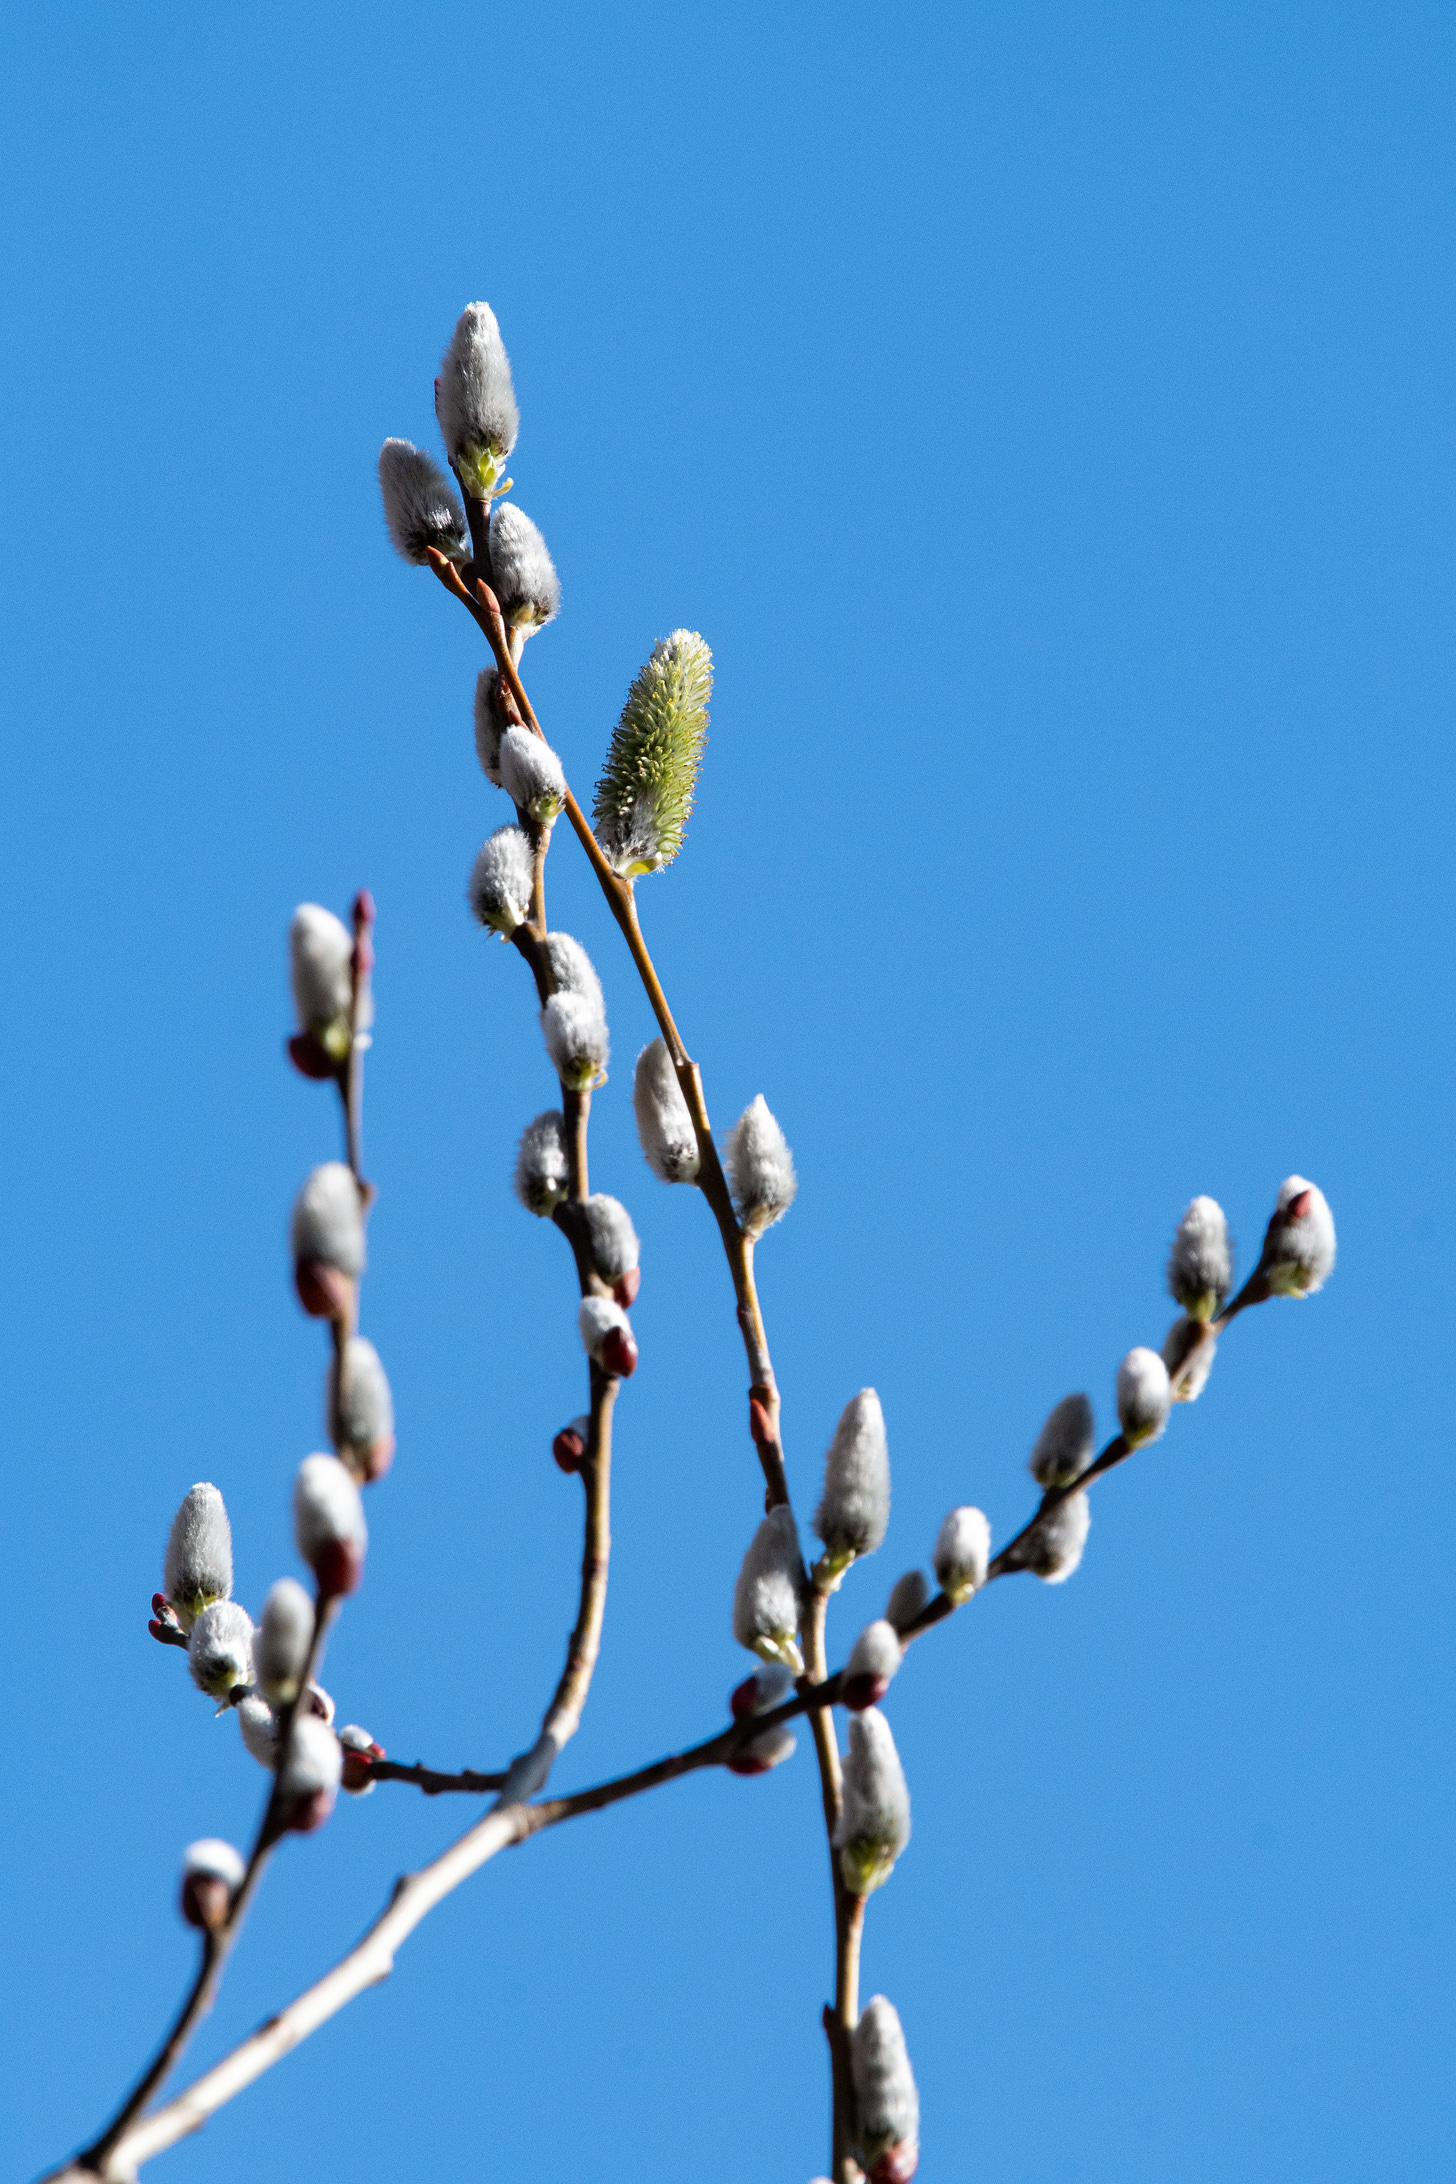 The downy silver catkins of a pussy willow, one of the catkins erupting into green